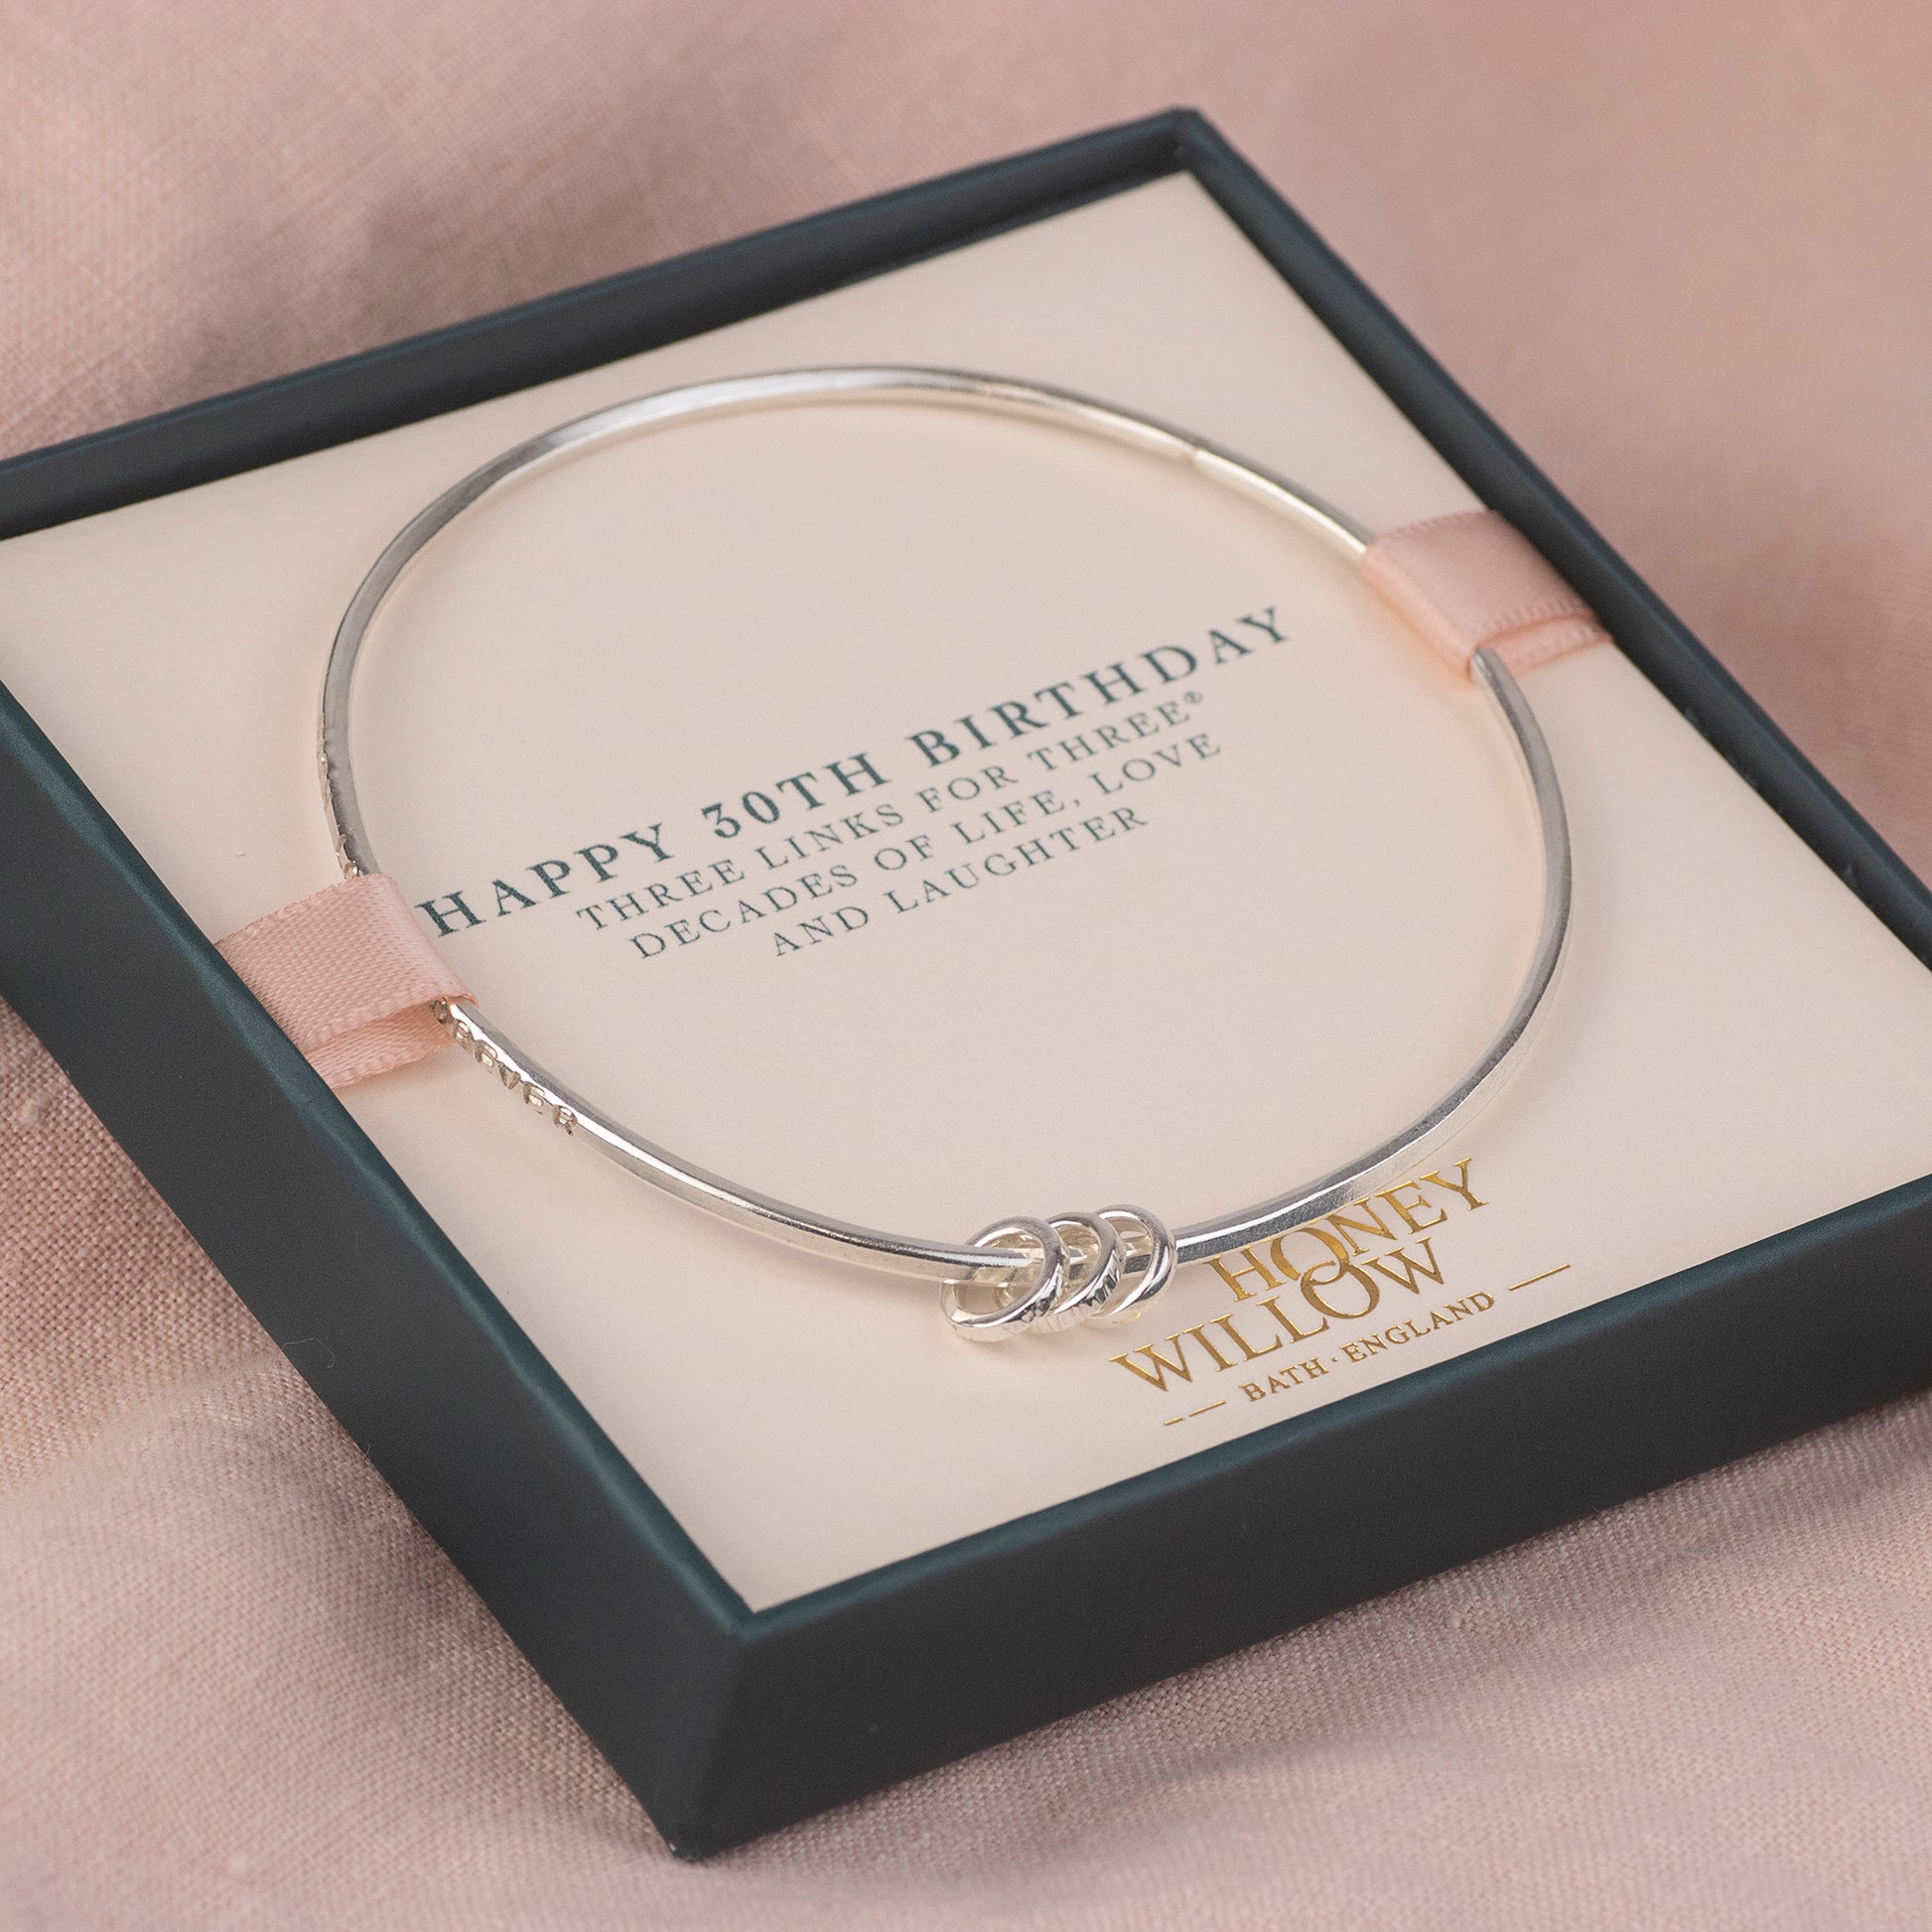 30th Birthday Gift - Personalised Bangle - 3 links for 3 decades